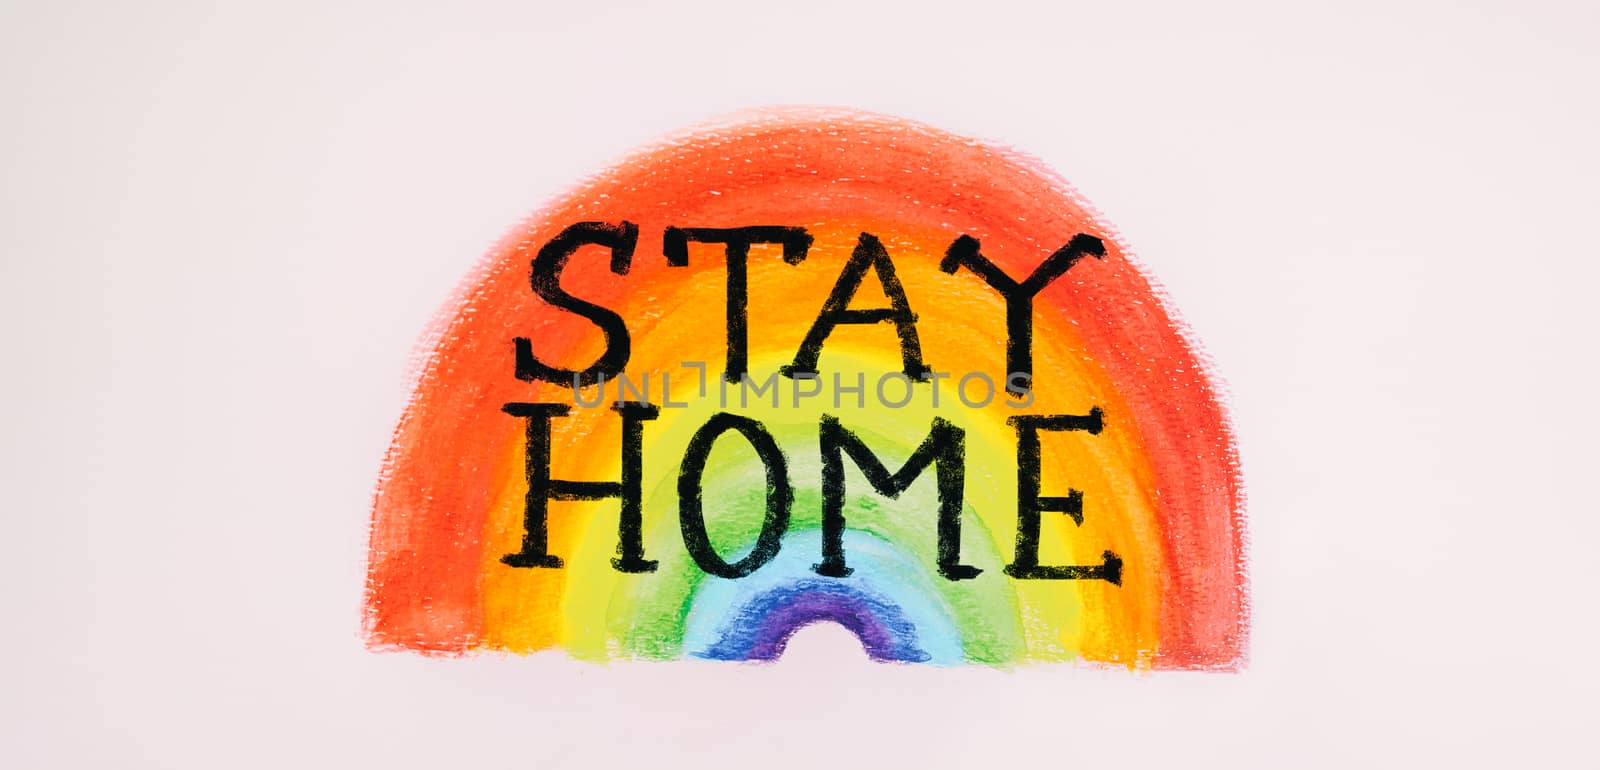 COVID-19 banner Coronavirus staying at home message sign with text "STAY HOME" written over rainbow child panting viral social media message for social distancing awareness. Flatten the curve by Maridav